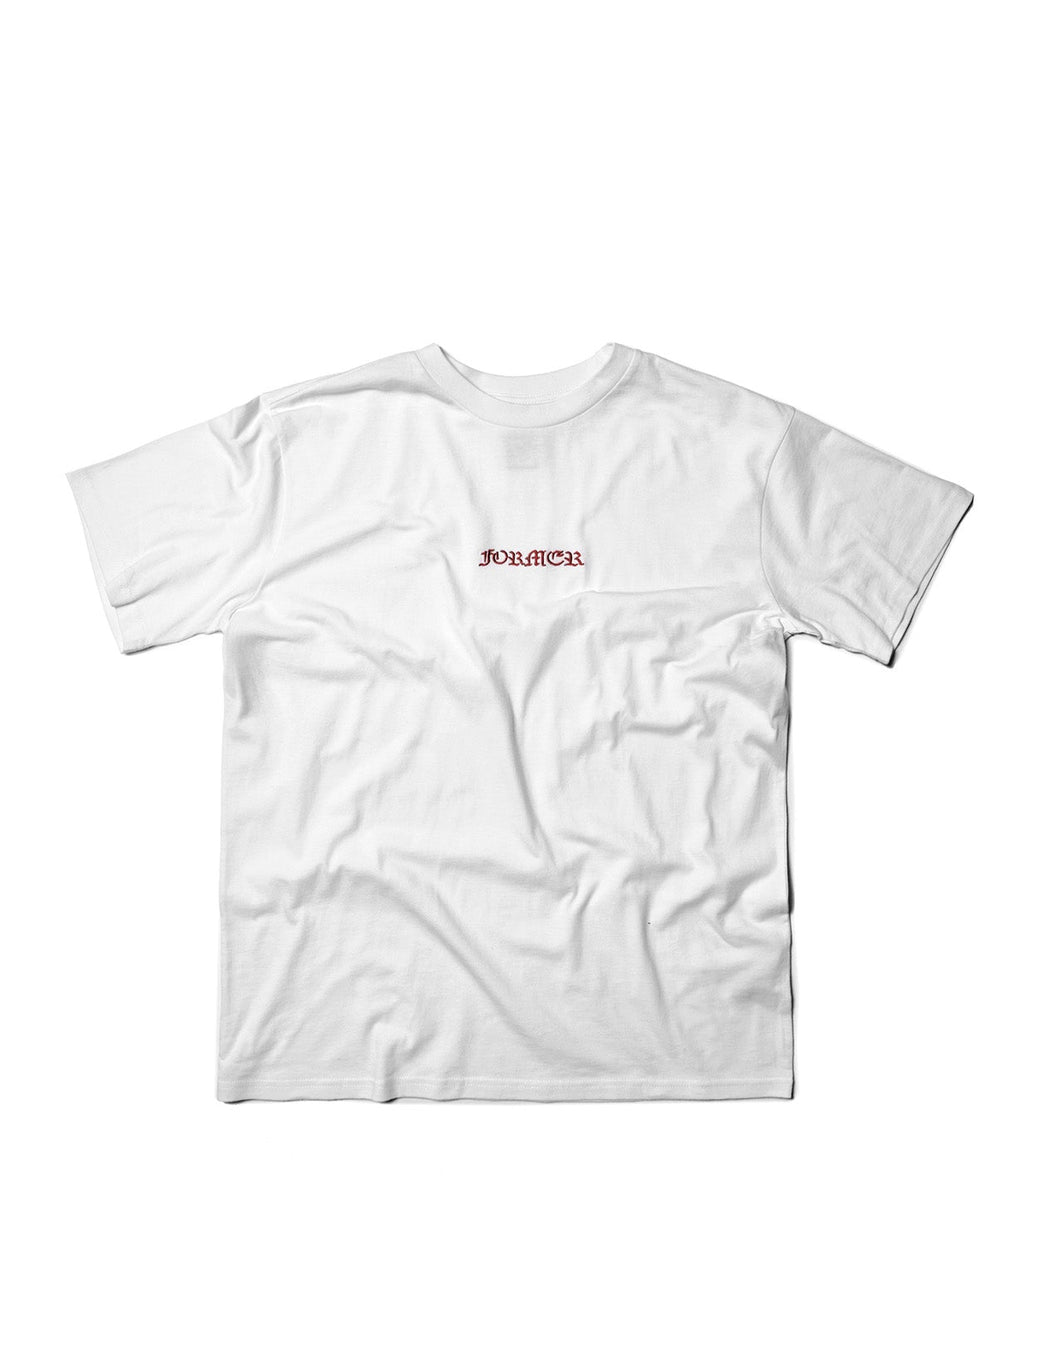 FORMER SCRIPTURE TEE - WHITE